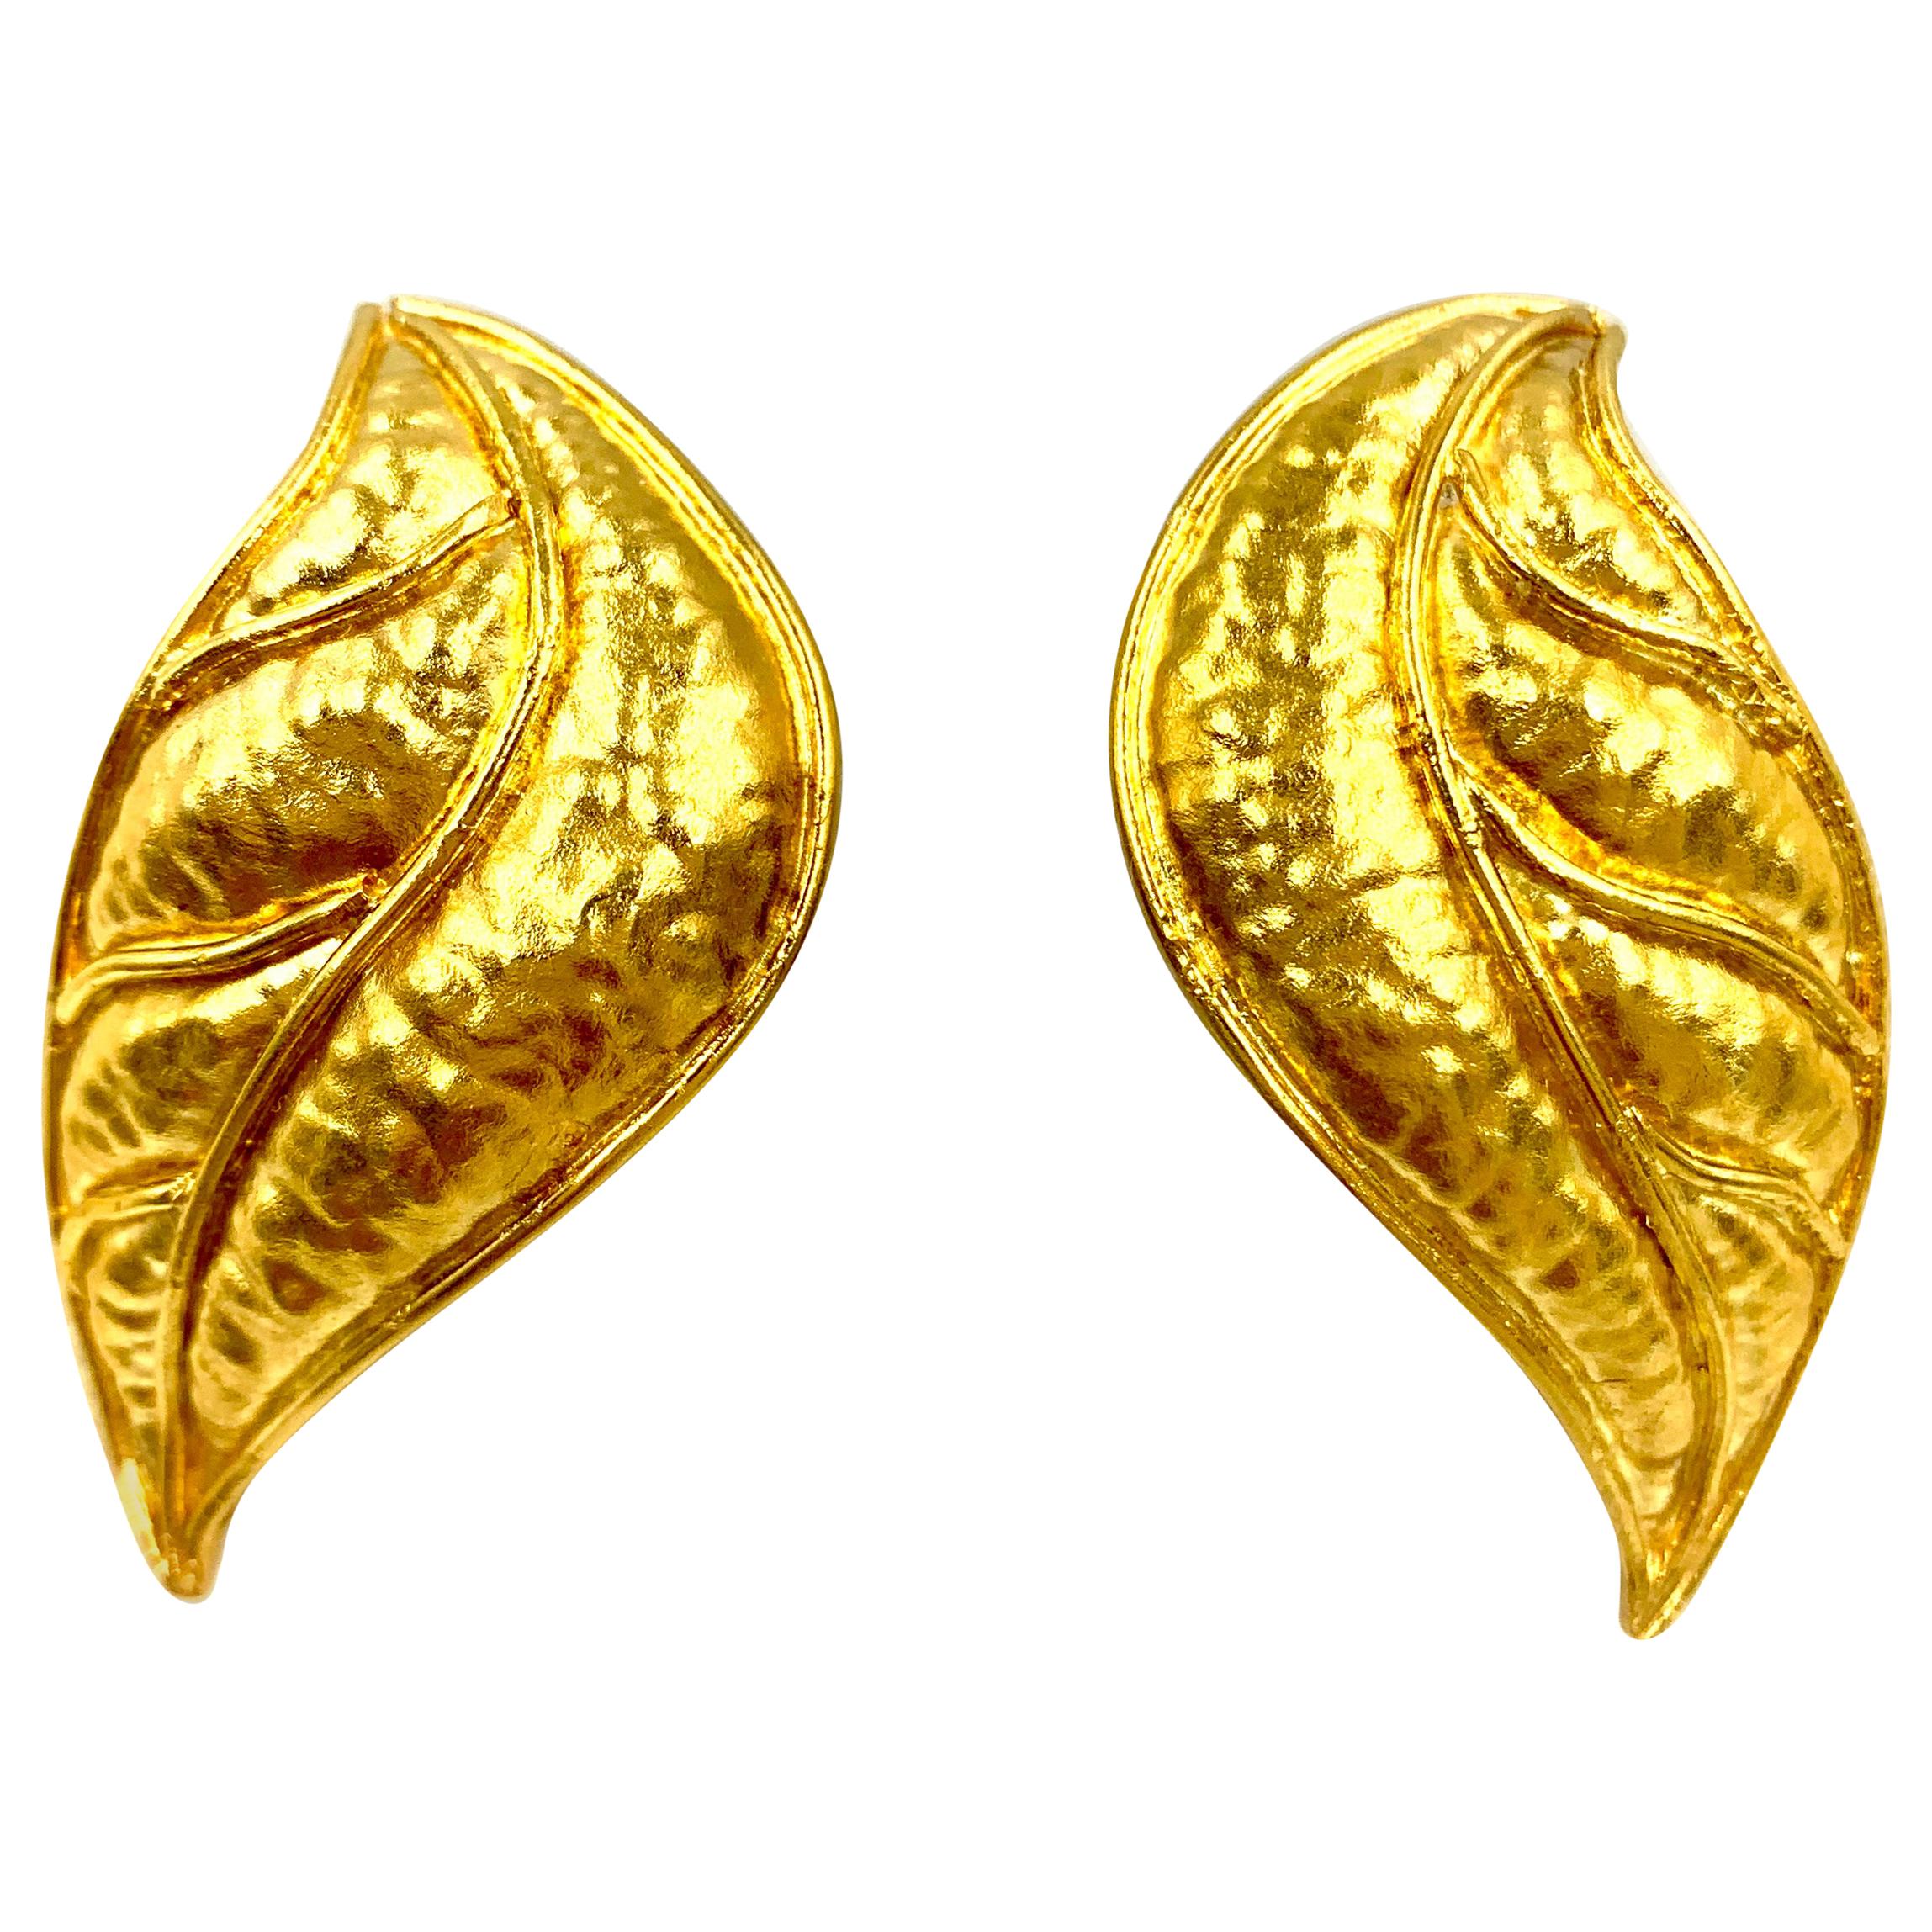 Classic Archaeological Style Large Hand Hammered 18K Gold Laurel Leaf Earrings